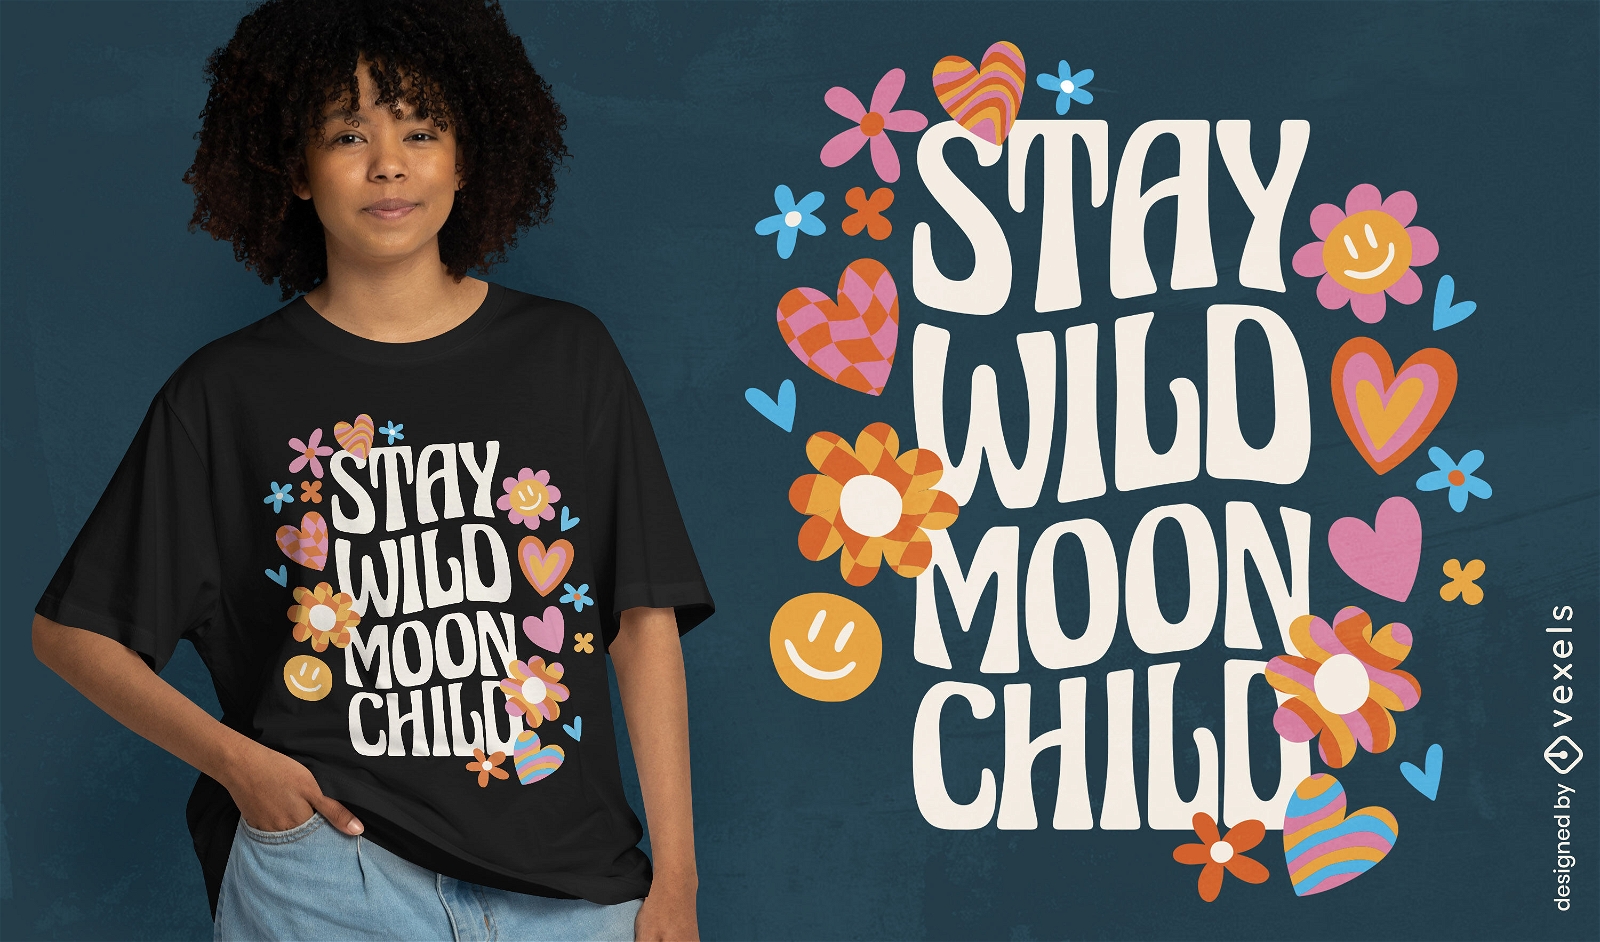 Stay Wild Moon Child Quote T-shirt Design Vector Download